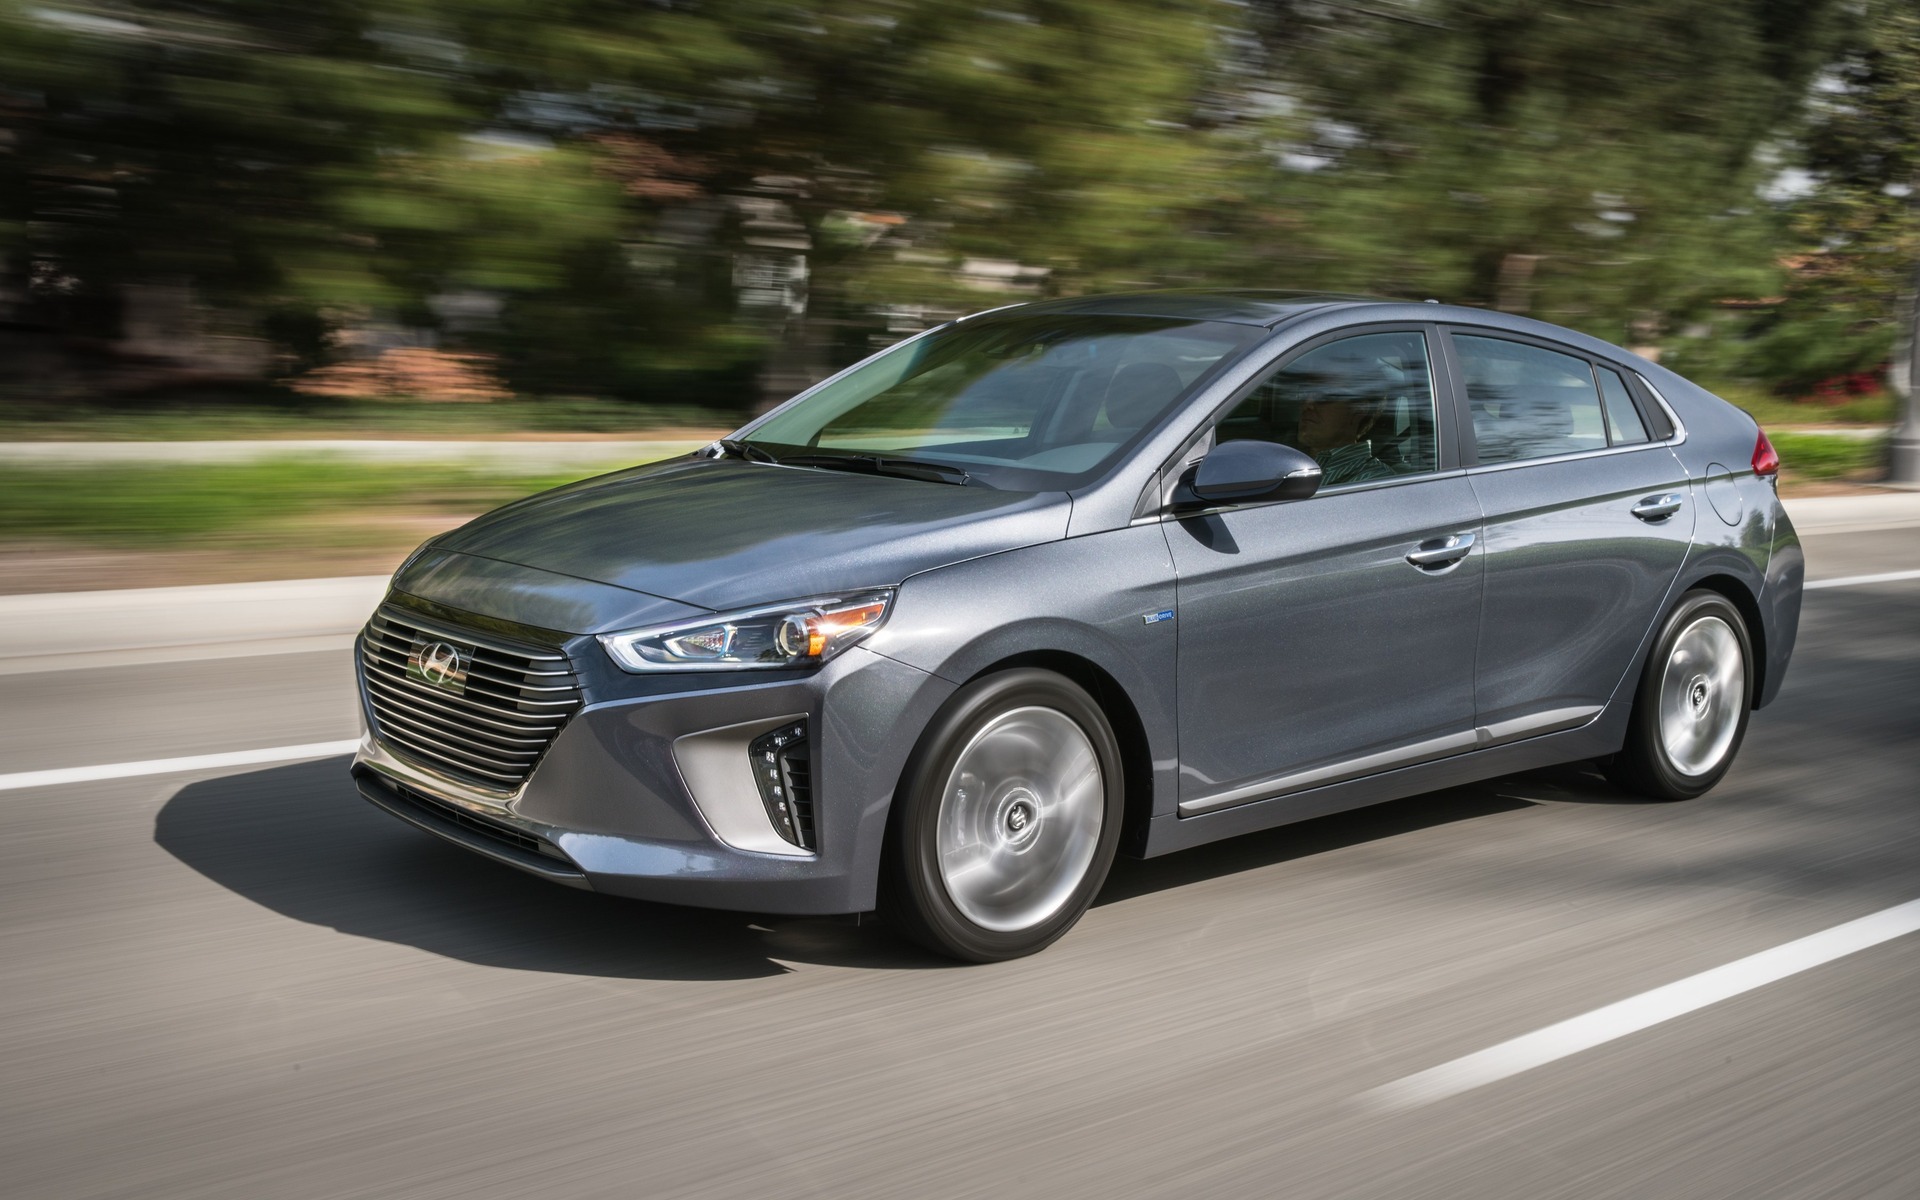 2017 Hyundai Ioniq electric car is long on features, short on range